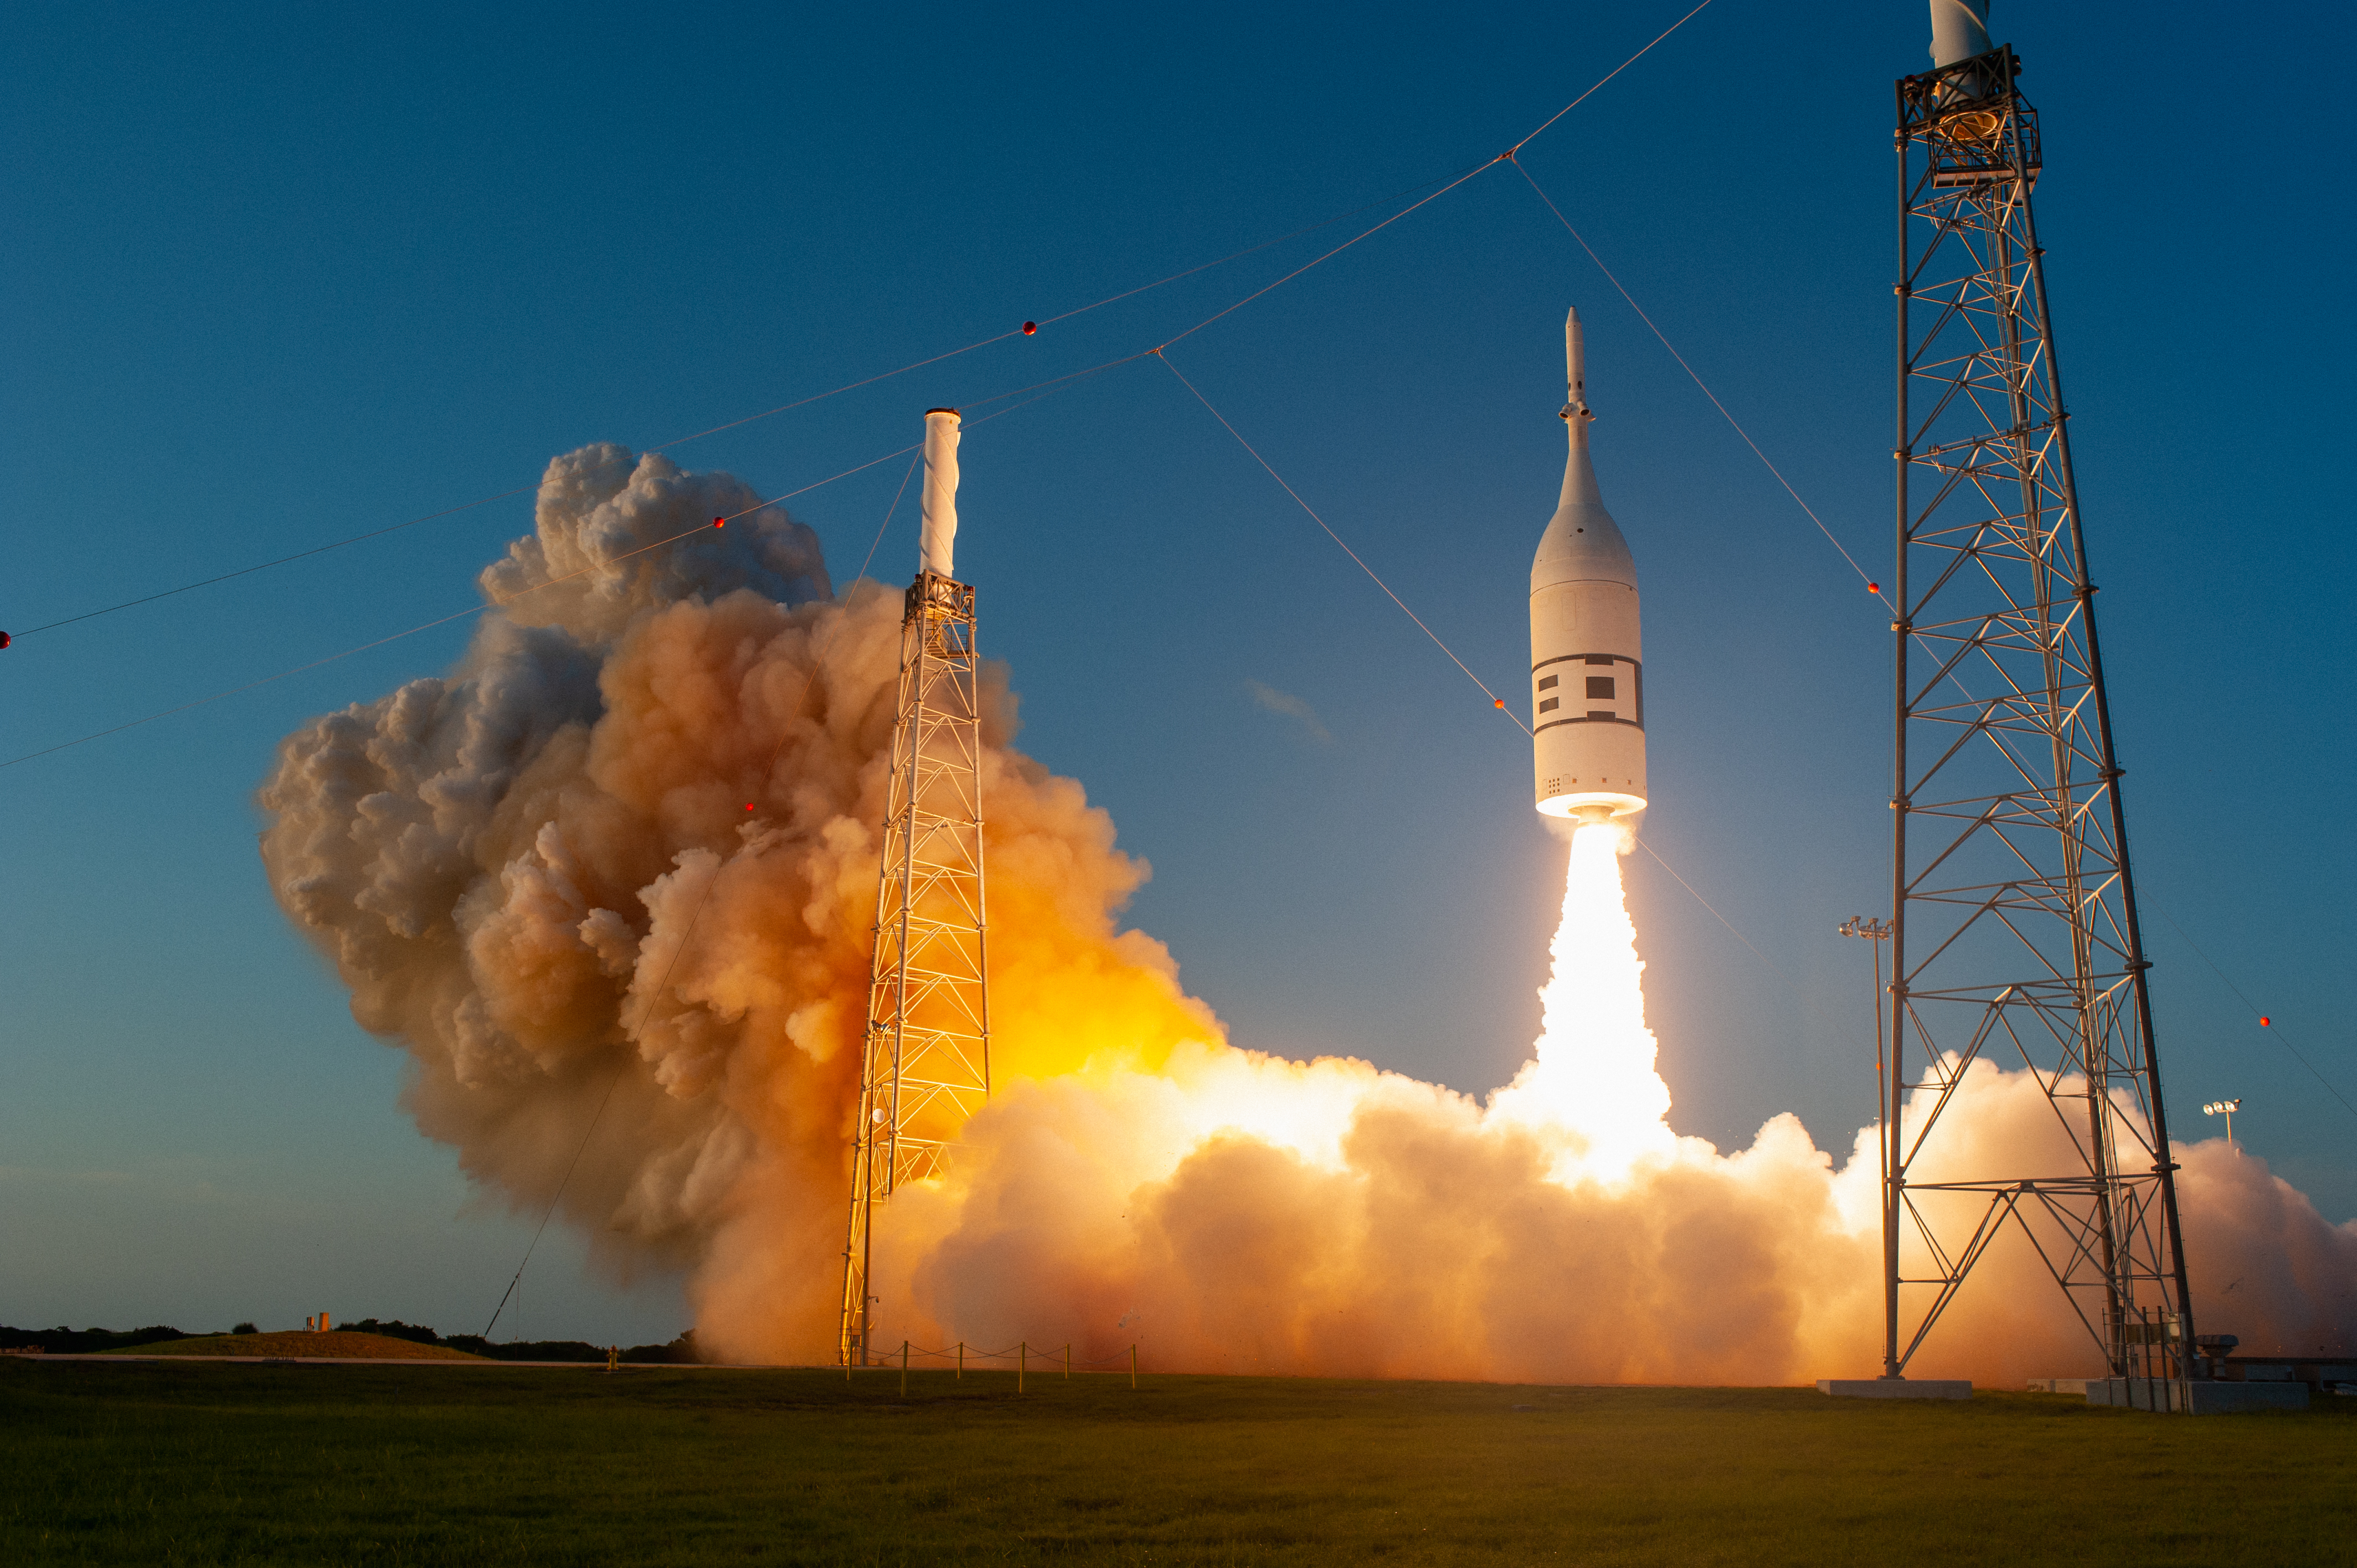 A fully functional Launch Abort System (LAS) with a test version of Orion attached, launches on NASA’s Ascent Abort-2 (AA-2) atop a Northrop Grumman provided booster on July 2, 2019, at 7 a.m. EDT, from Launch Pad 46 at Cape Canaveral Air Force Station in Florida. During AA-2, the booster will send the LAS and Orion to an altitude of 31,000 feet, traveling at Mach 1.15 (more than 1,000 mph). The LAS’ three motors will work together to pull the crew module away from the booster and prepare it for splashdown in the Atlantic Ocean. The flight test will prove that the abort system can pull crew to safety in the unlikely event of an emergency during ascent.